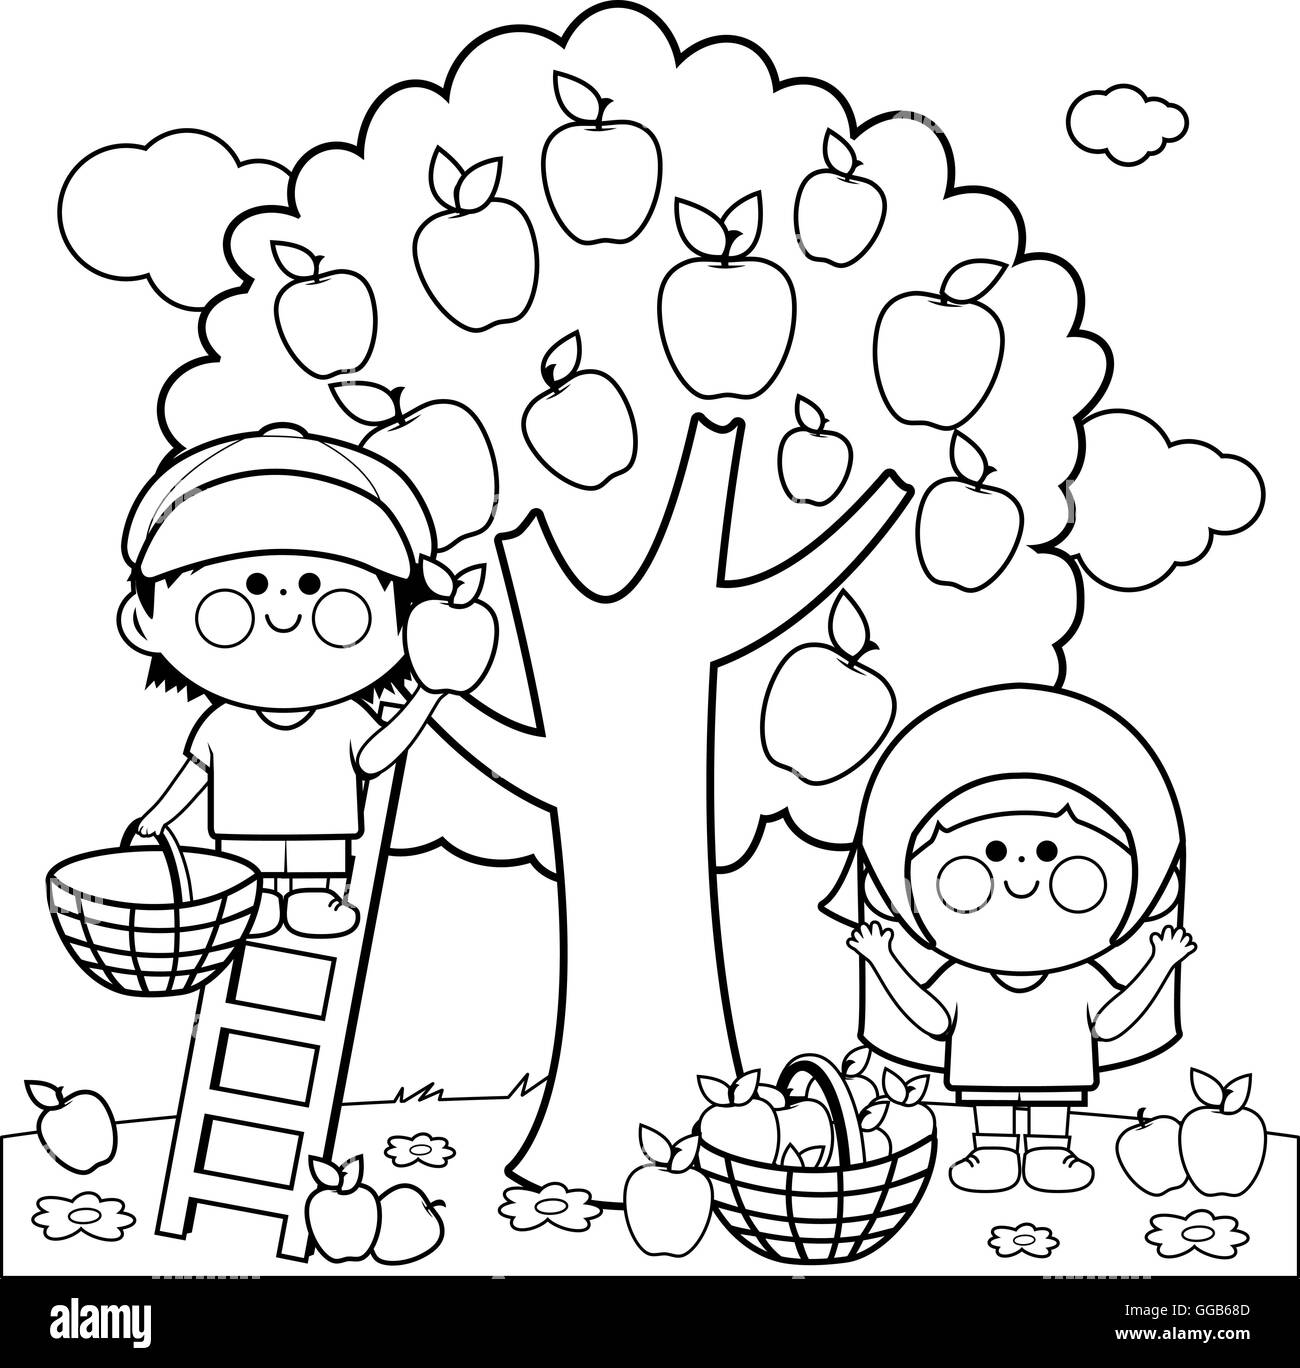 Kids harvesting apples coloring book page. Stock Vector